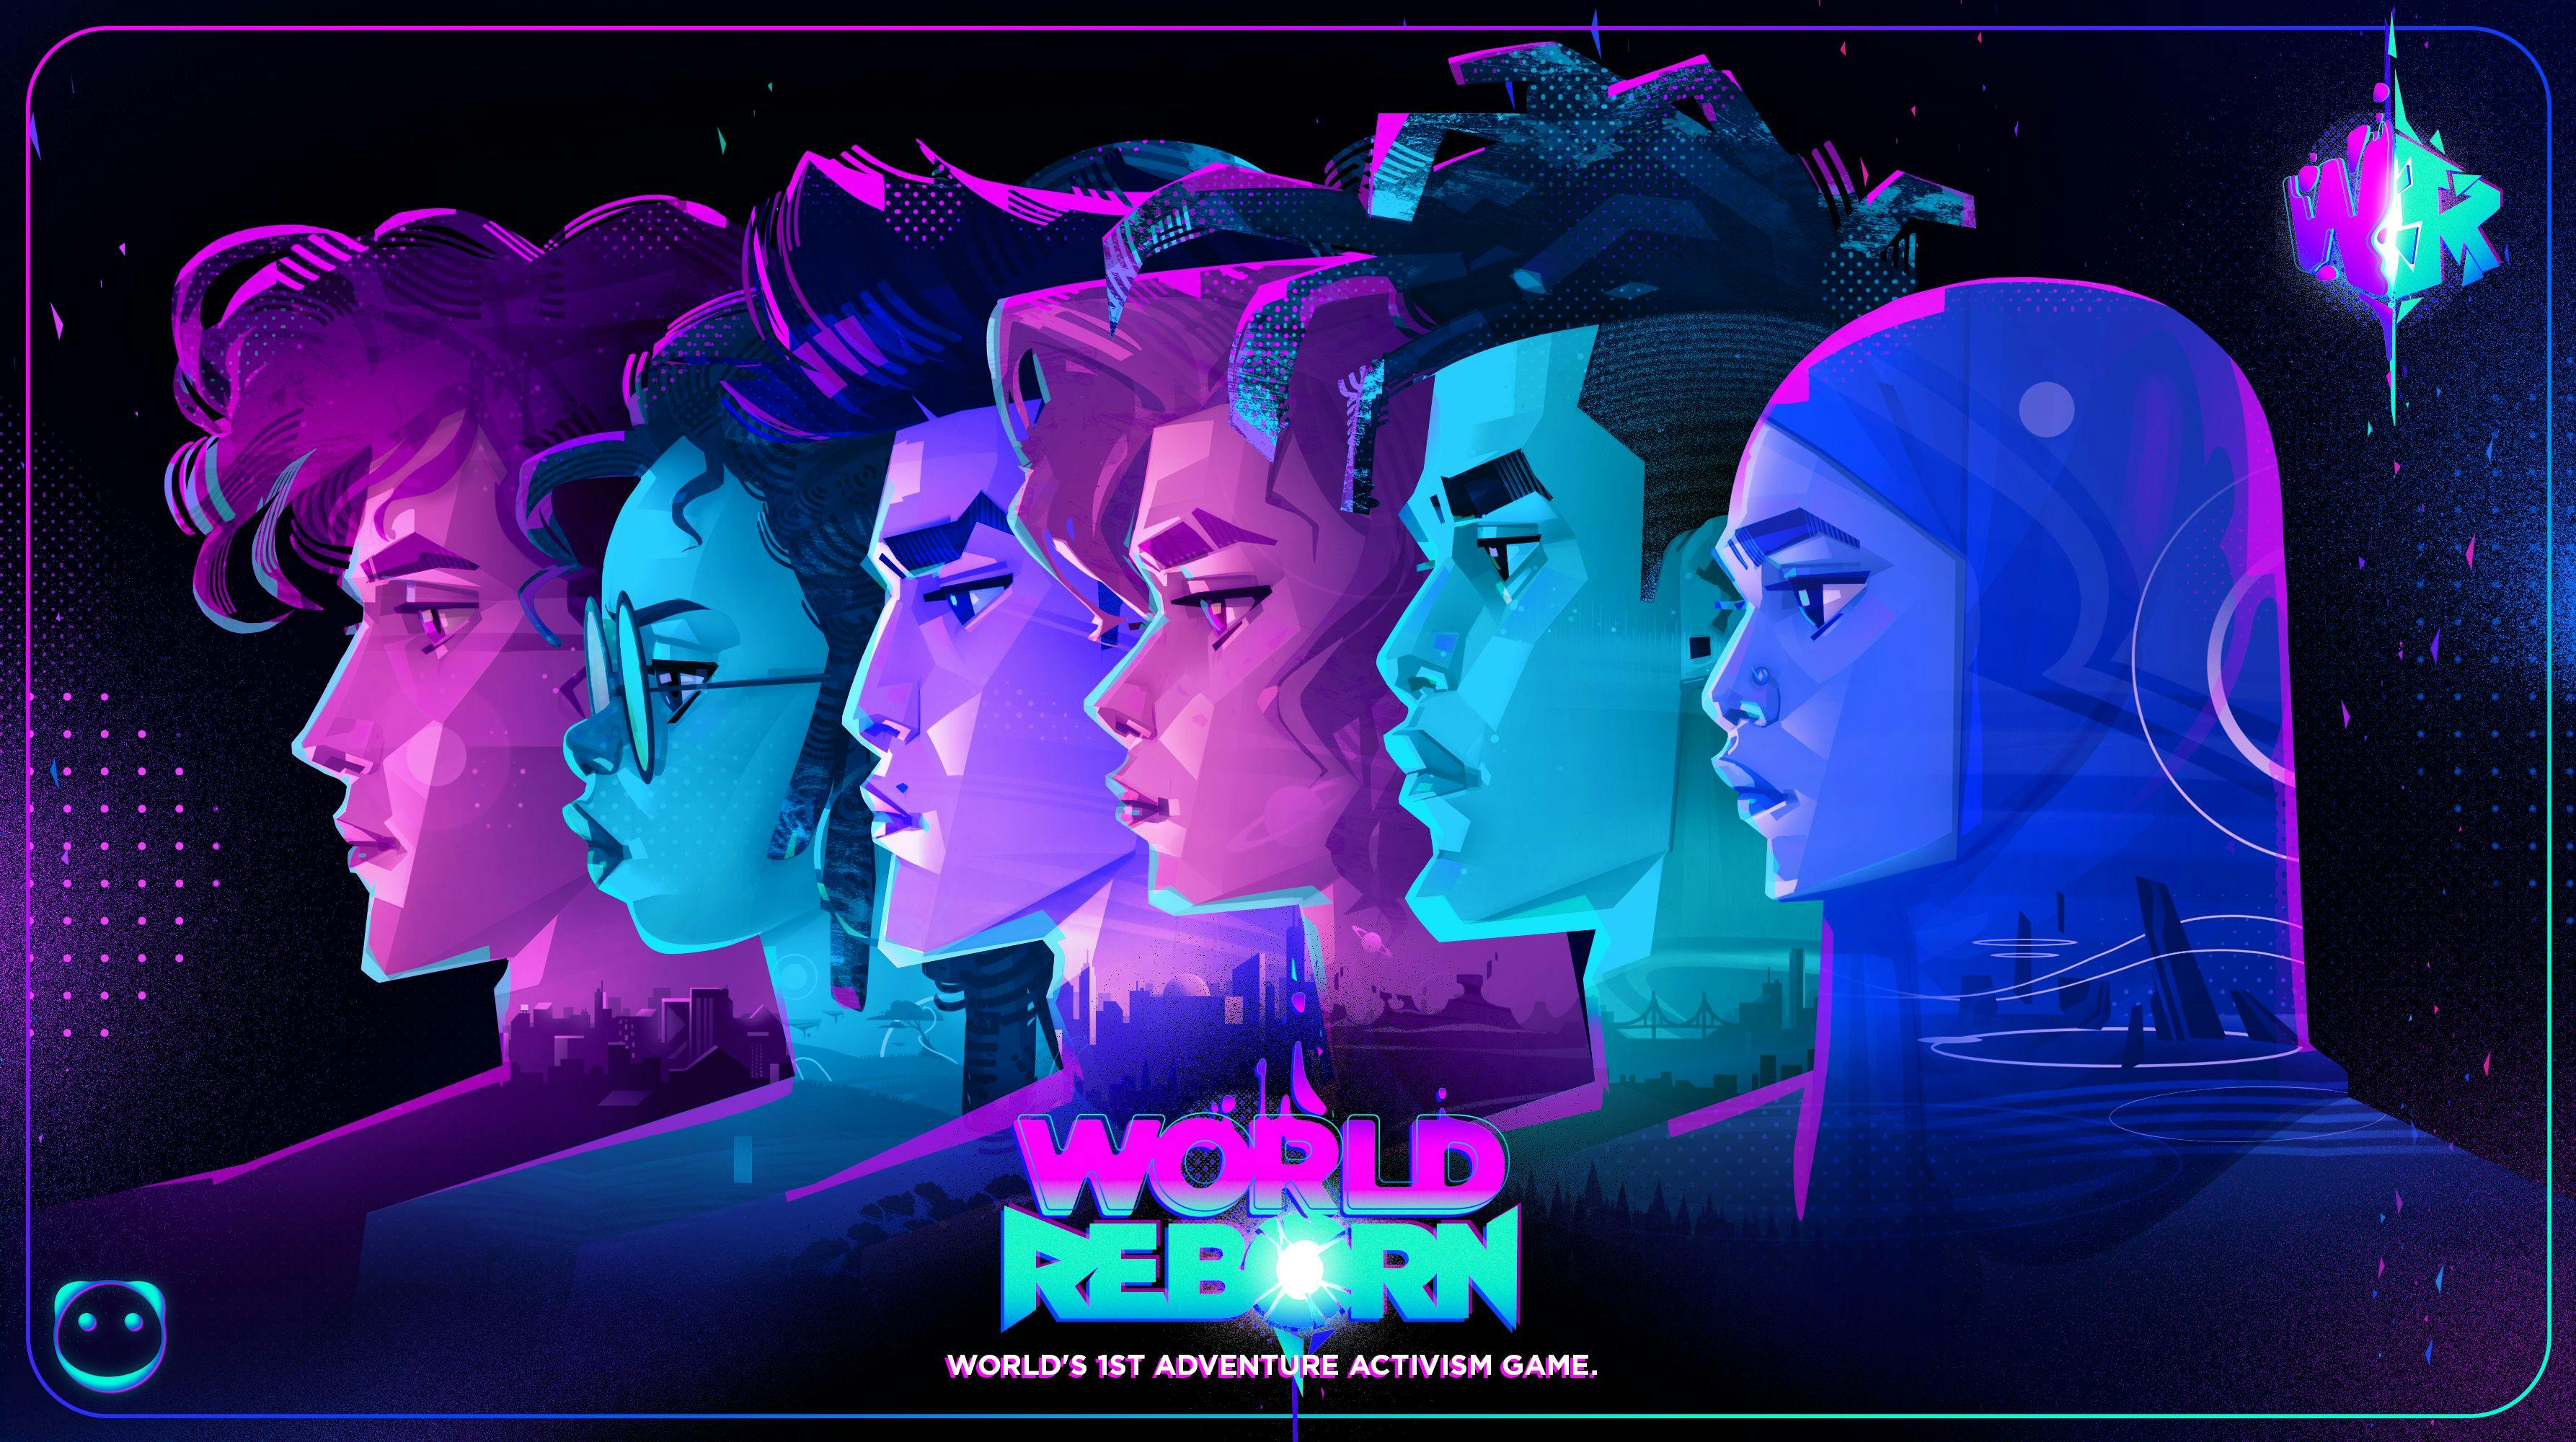 Poster for activism adventure game World Reborn from Wicked Saints